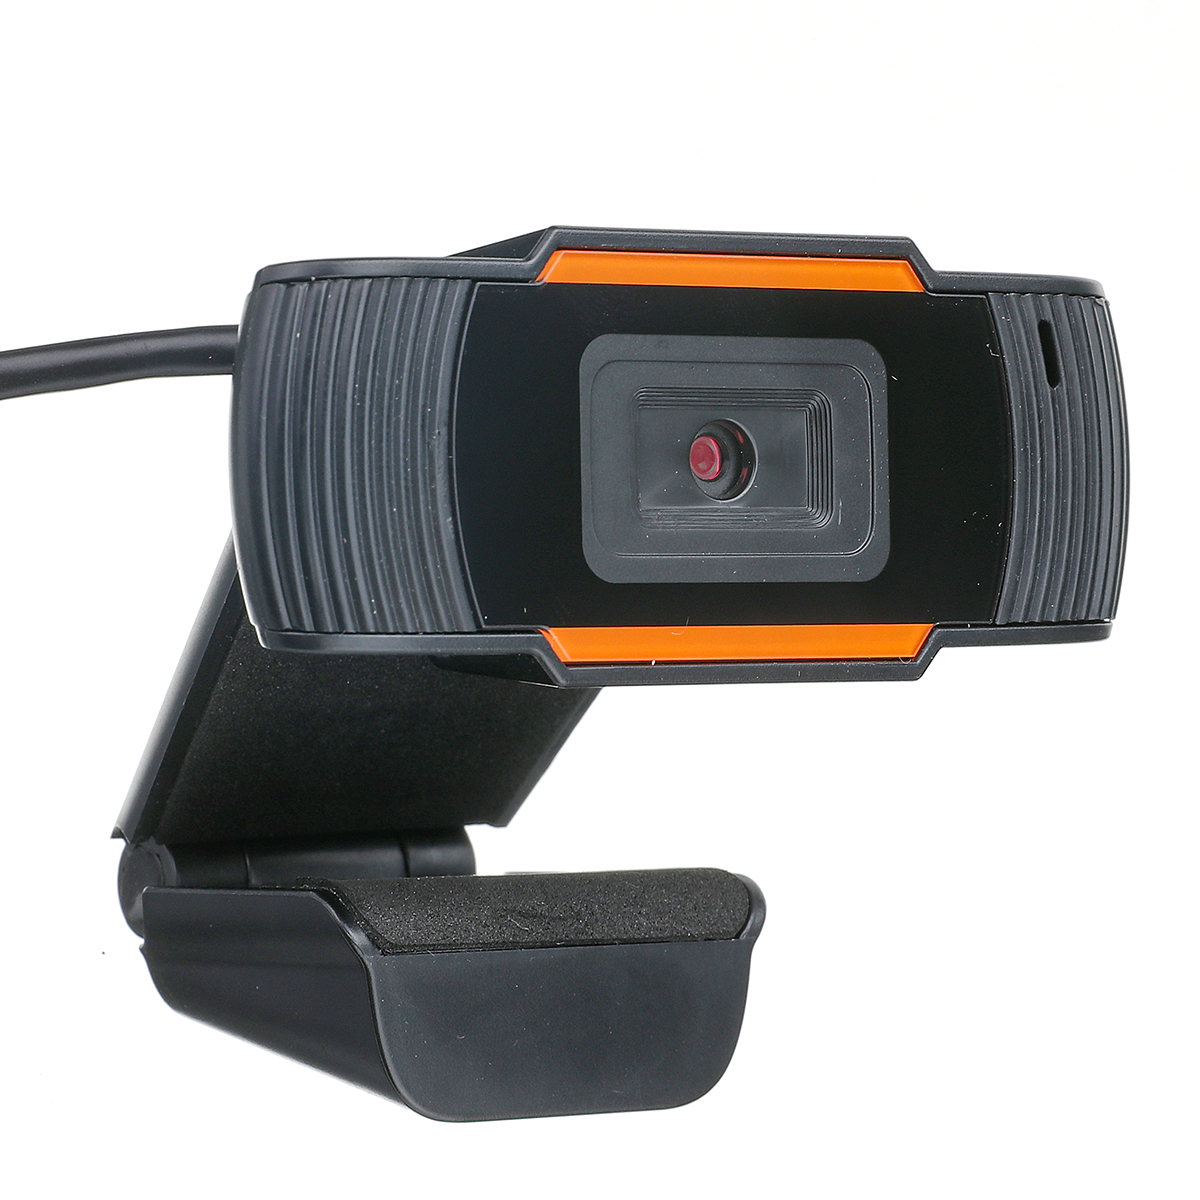 Find MECO ELEVERDE HD 1080P Webcam Auto-Focus Wide Angle View Built-in Noise Cancellation Microphone Wired USB2.0 Computer Camera for Sale on Gipsybee.com with cryptocurrencies